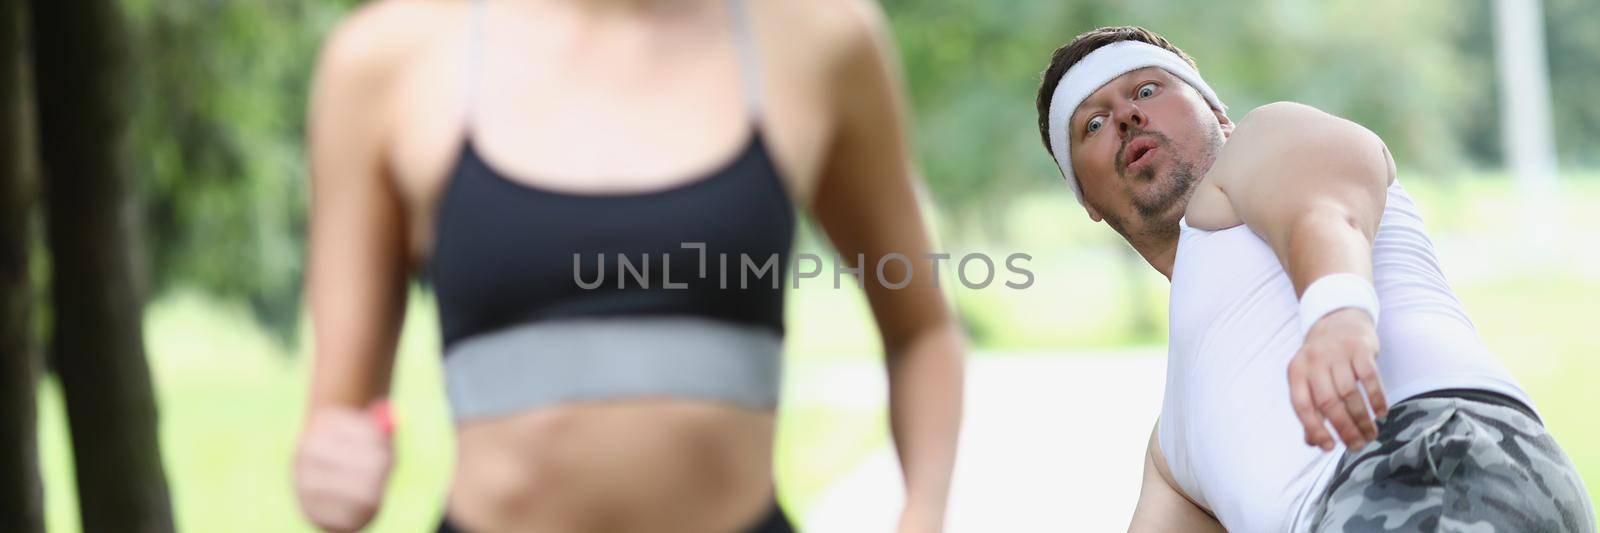 Portrait of tired sweaty middle aged man fall from beauty of young woman. Active woman jogging in front, feeling energetic. Sport, healthy habit concept